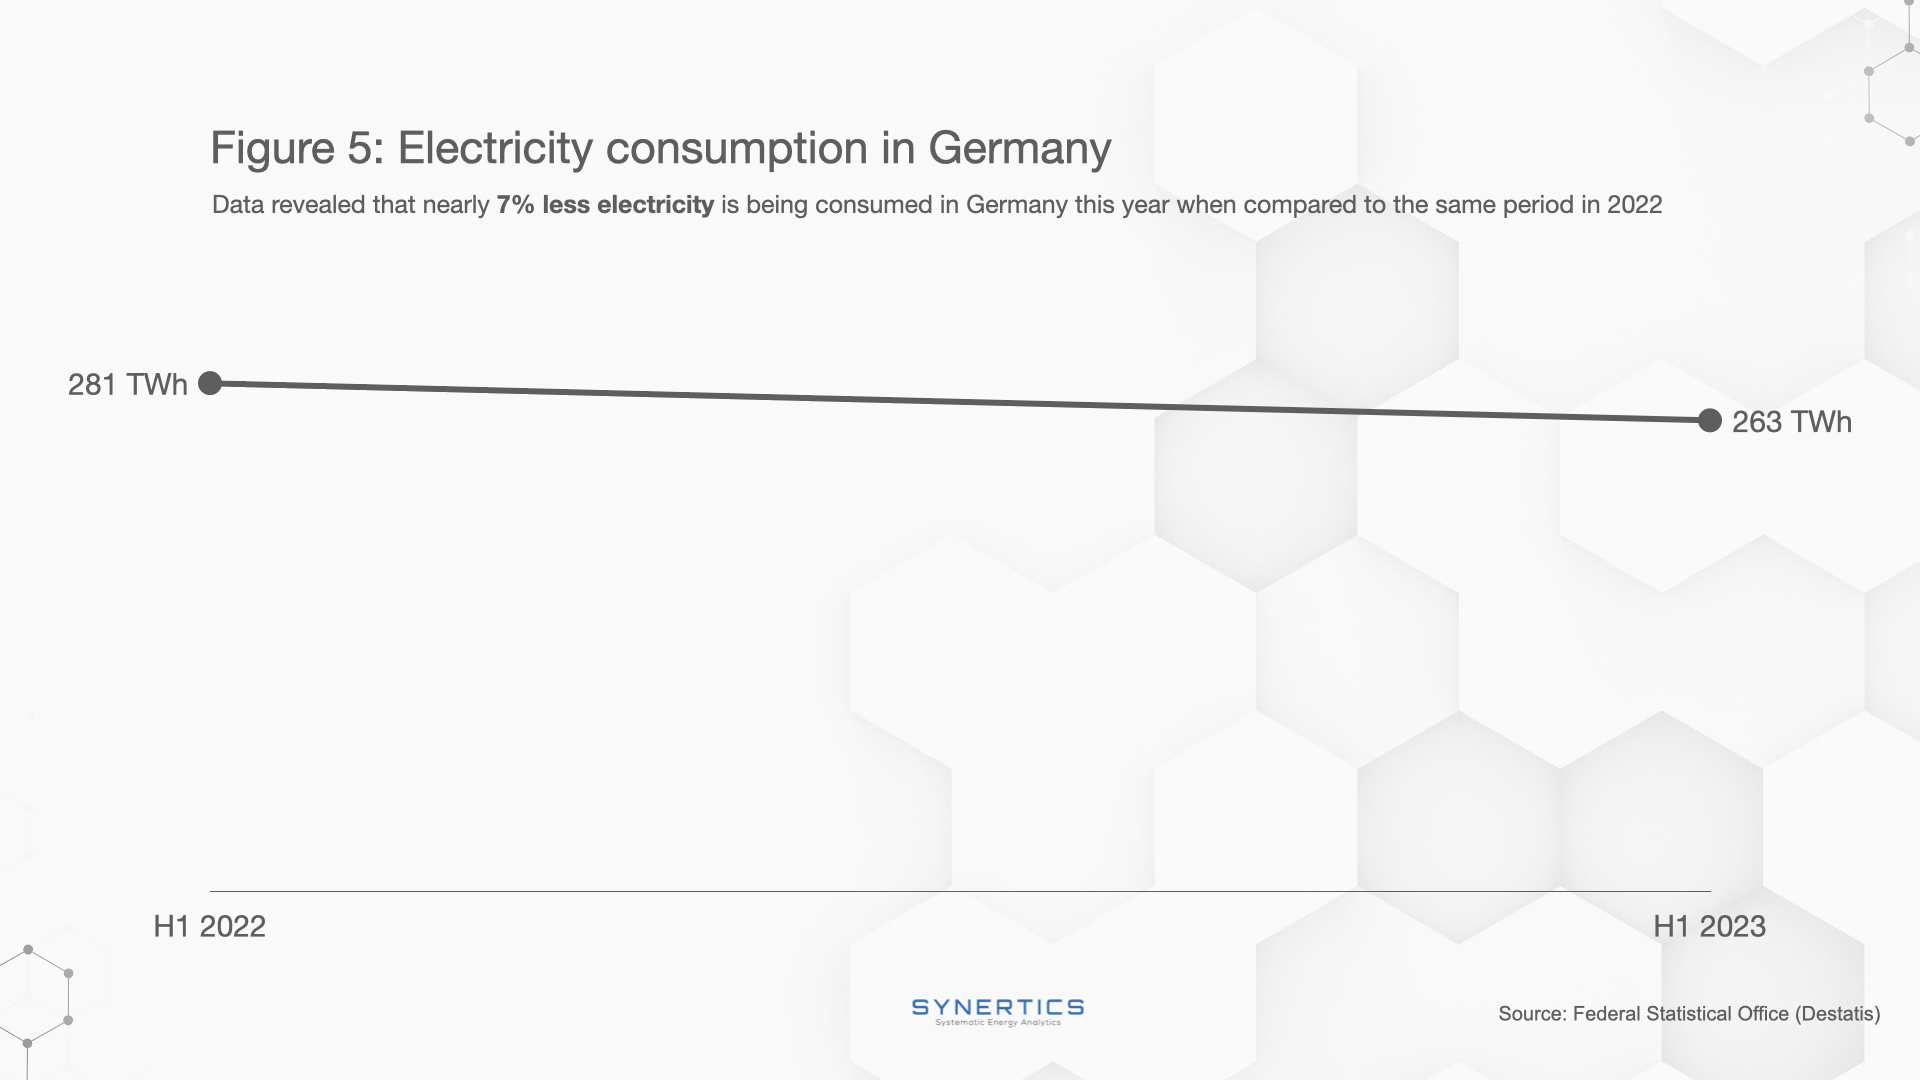 Electricity consumption in Germany